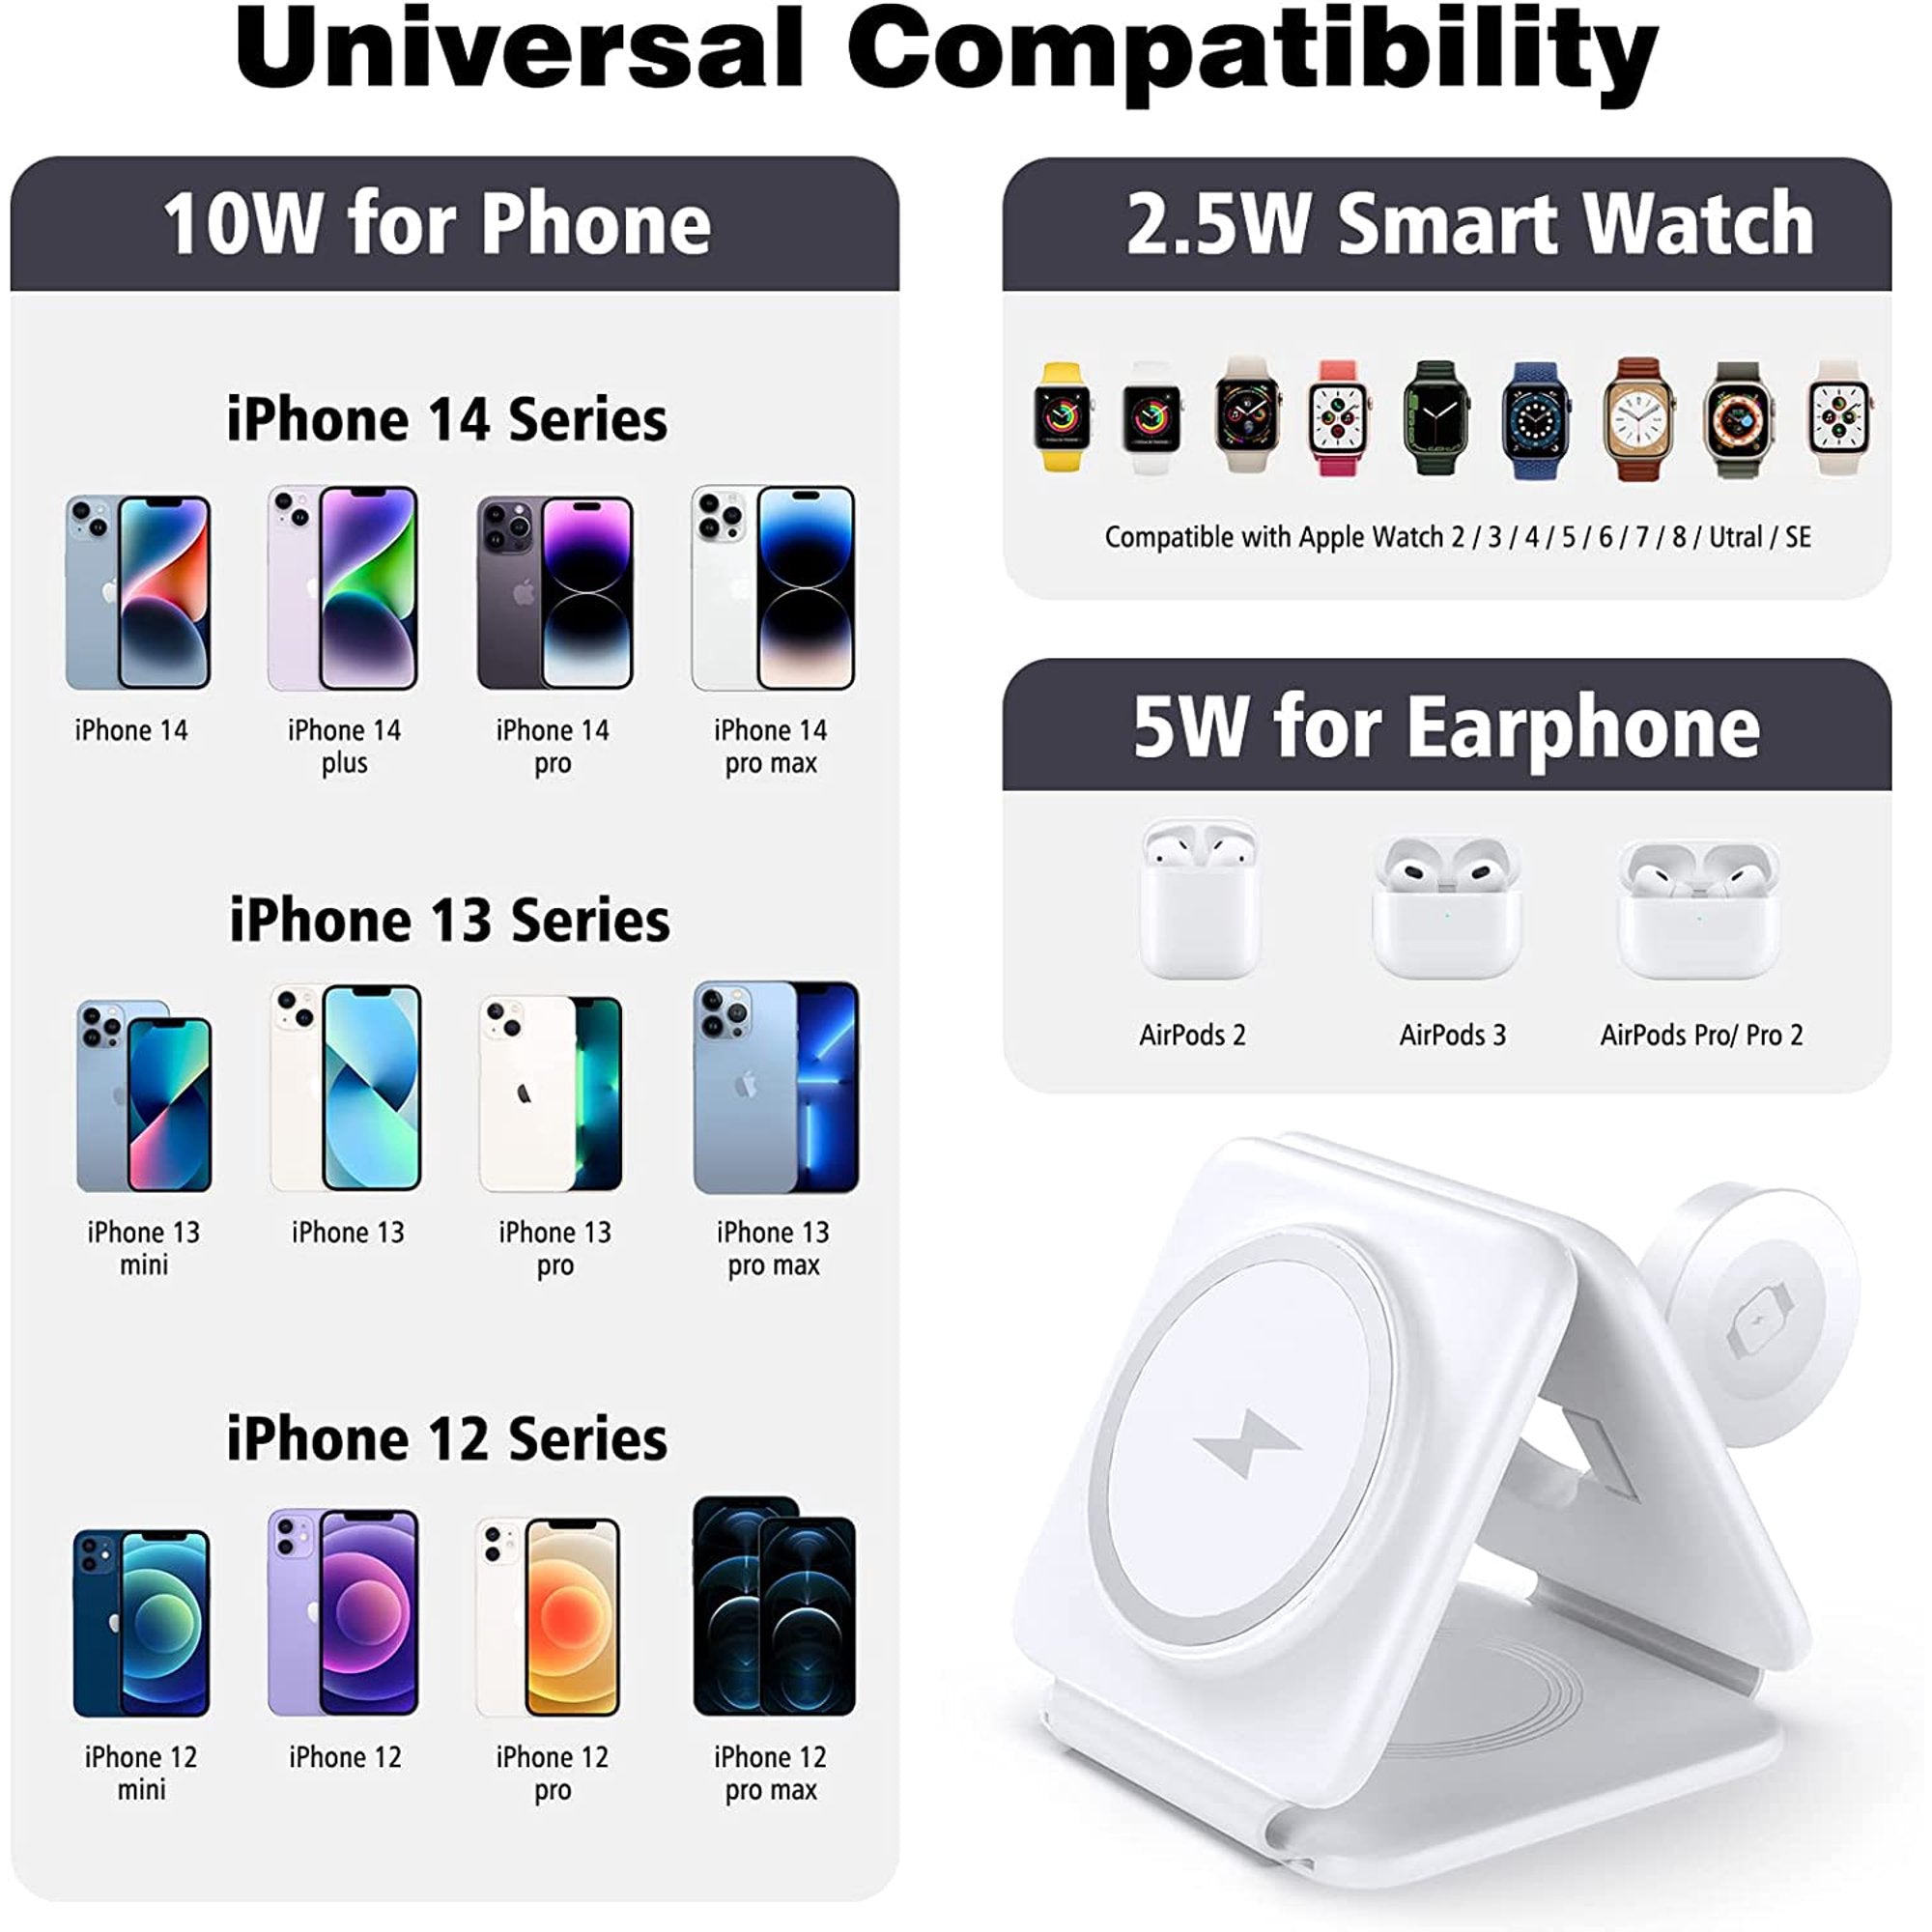 EvoFine 3 in 1 Wireless Charger for iPhone,Magnetic Foldable 3 in 1 Charging Station,Travel Charger for Multple Devices for iPhone 14/13/12 Series,AirPods 3/2/Pro,iWatch